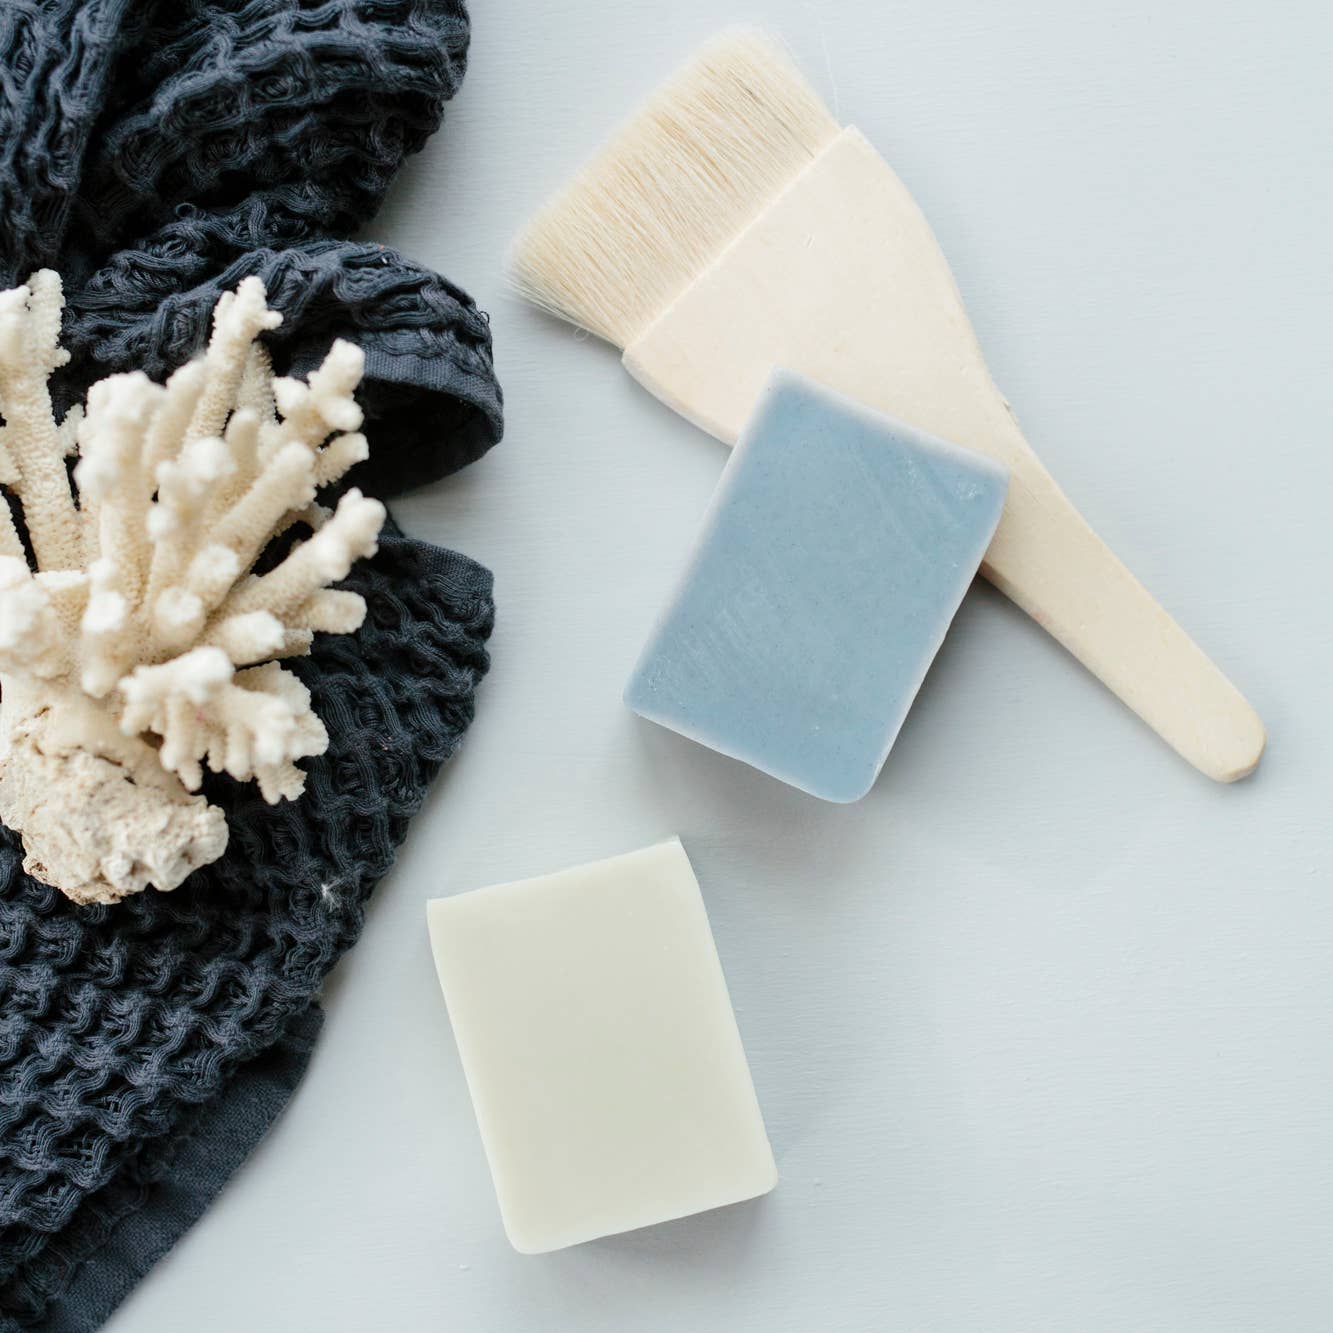 Bell Mountain Naturals' soap bars in a few different scents, shown next to a towel.